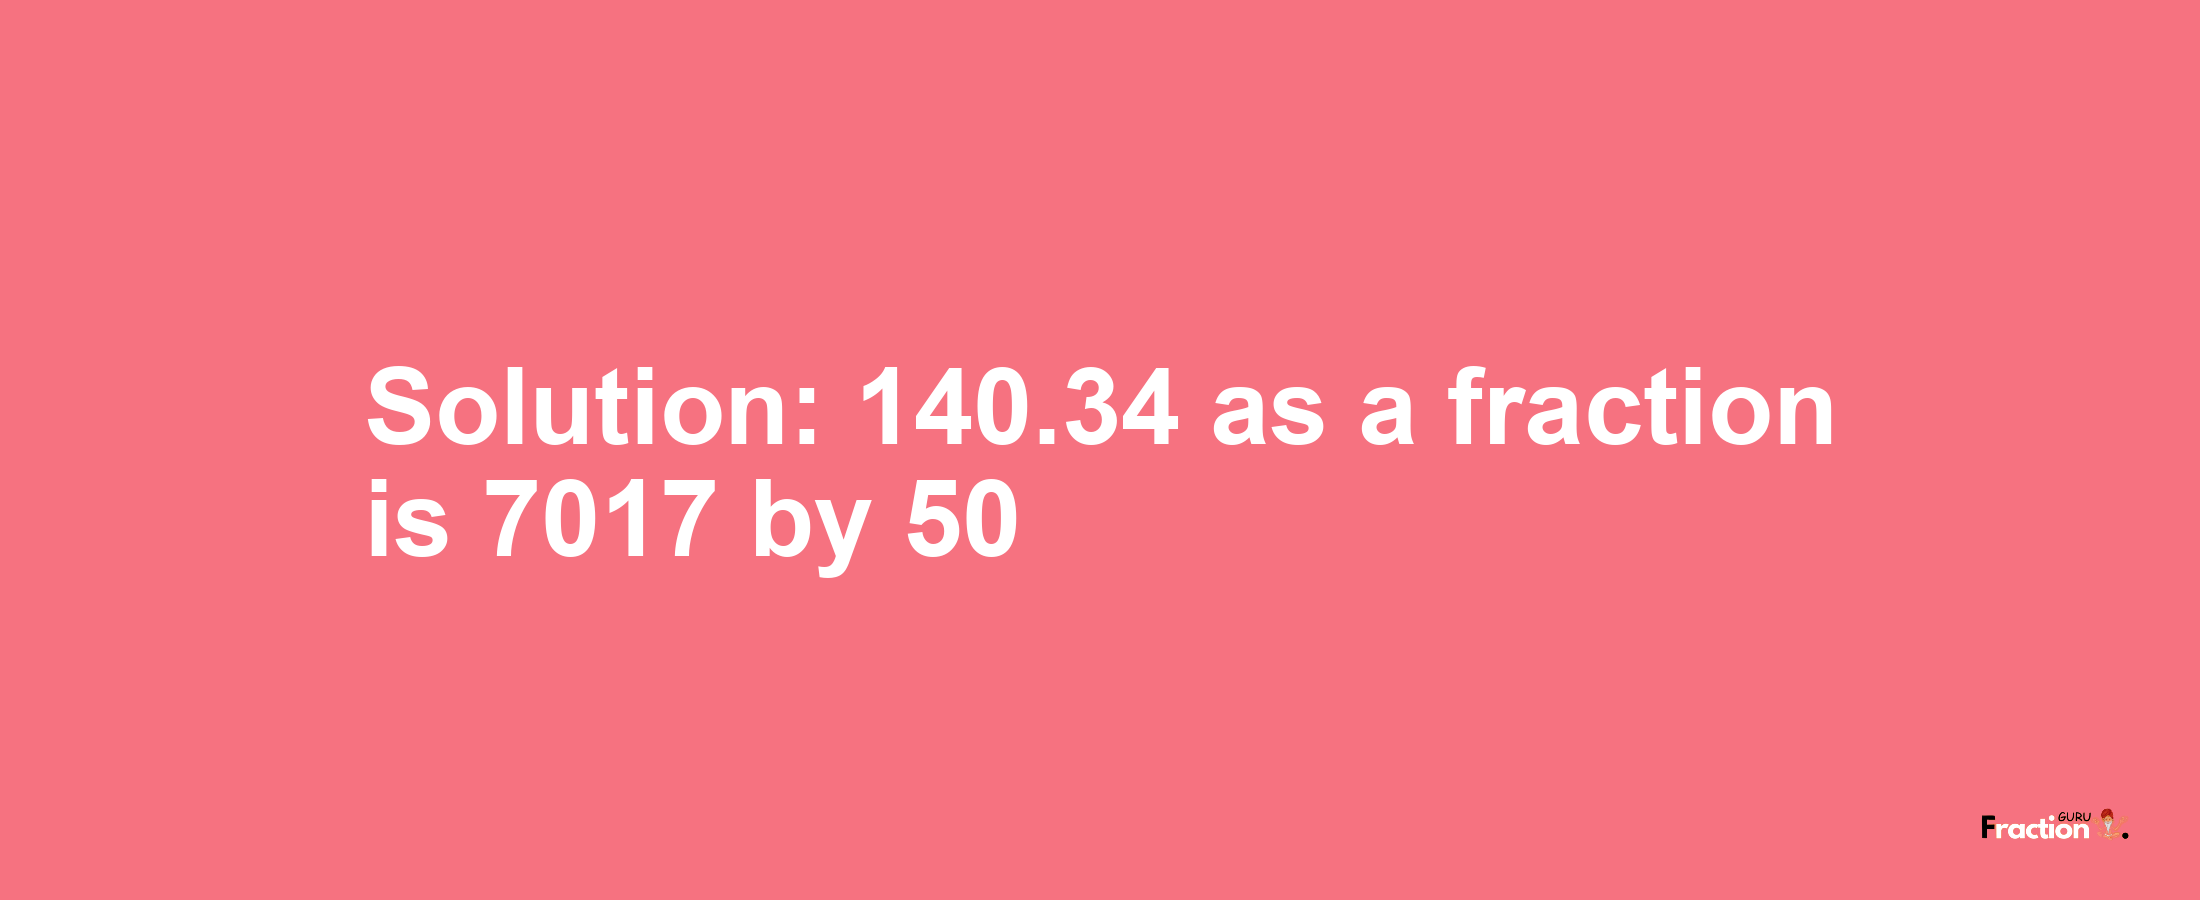 Solution:140.34 as a fraction is 7017/50